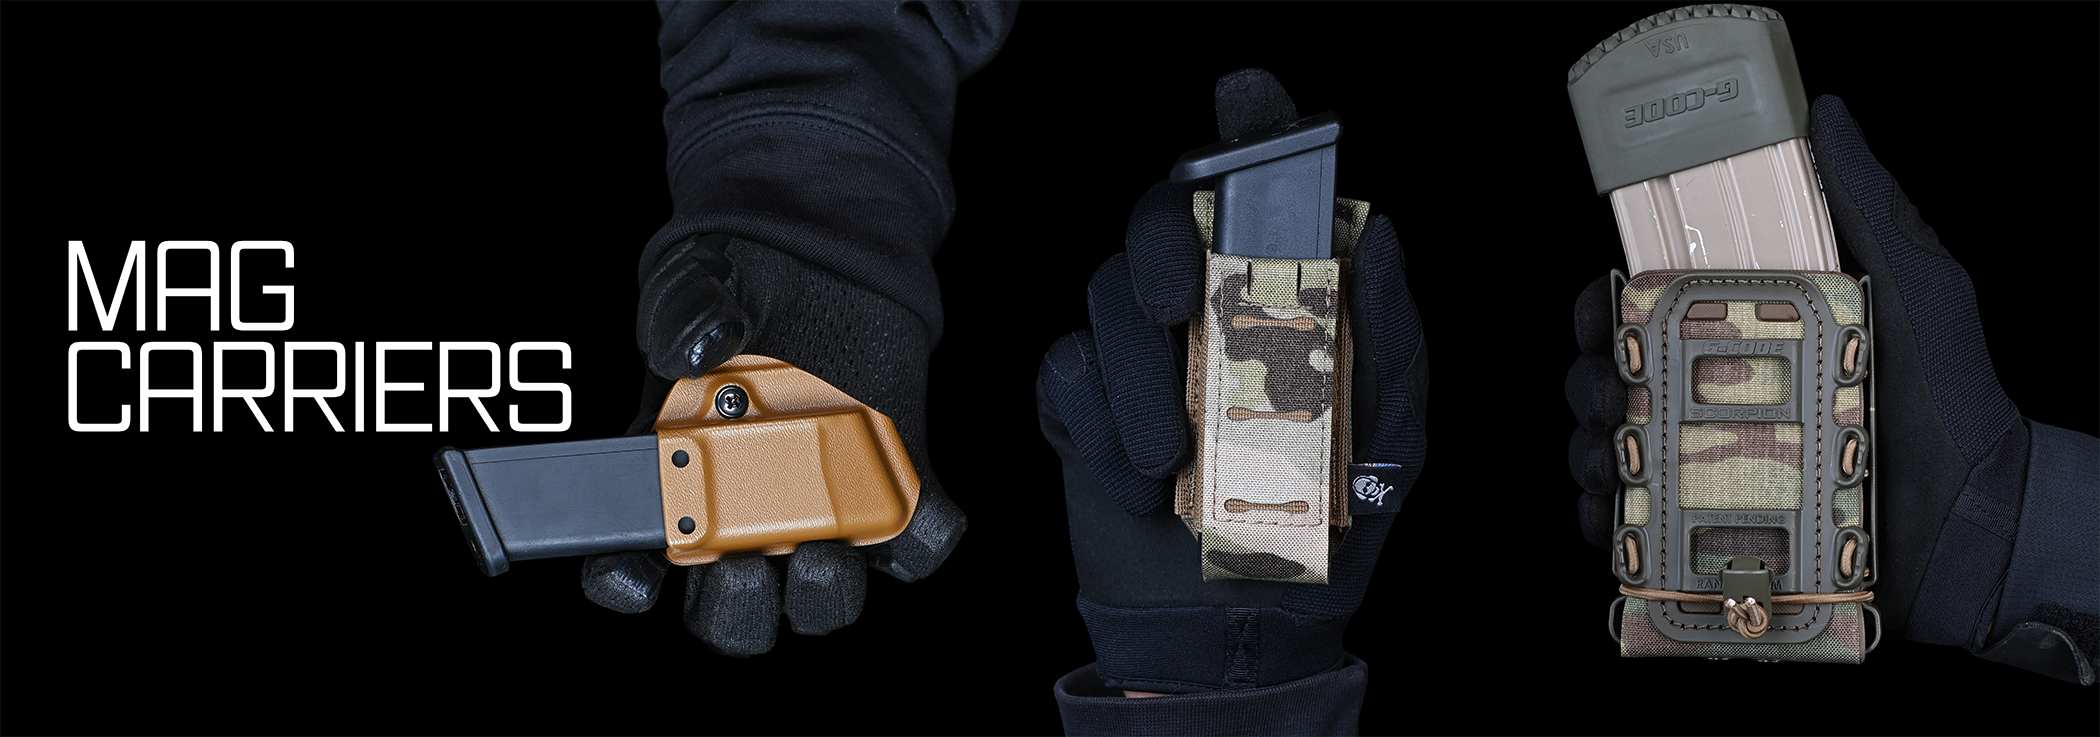 Magazine Carriers - tactical holsters and equipment